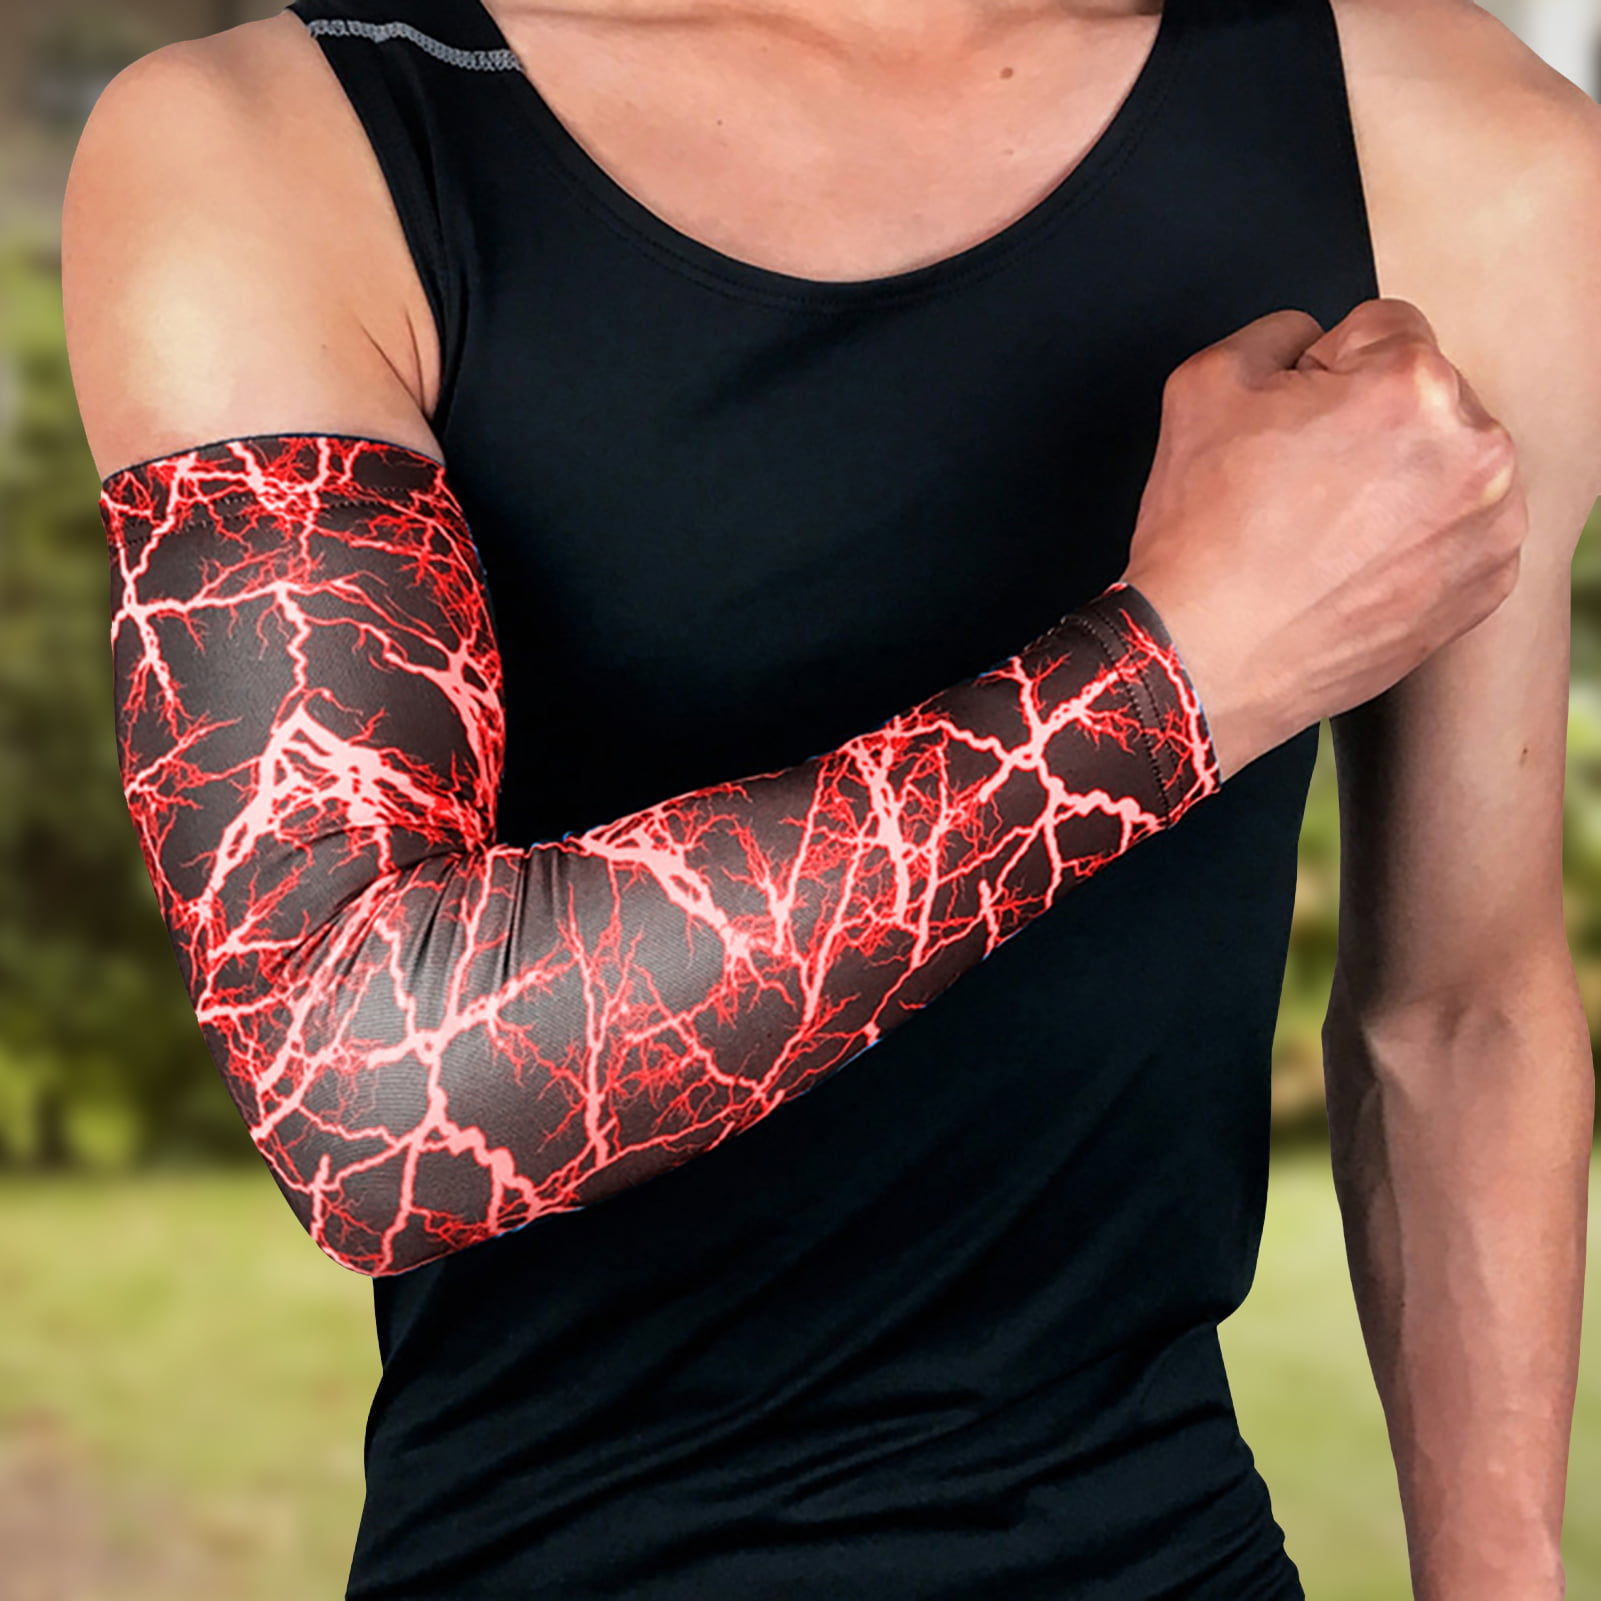 Camo Sleeve Tattoo|unisex Sun Protection Arm Sleeves - Banksy Camo Tattoo  Design For Outdoor Sports